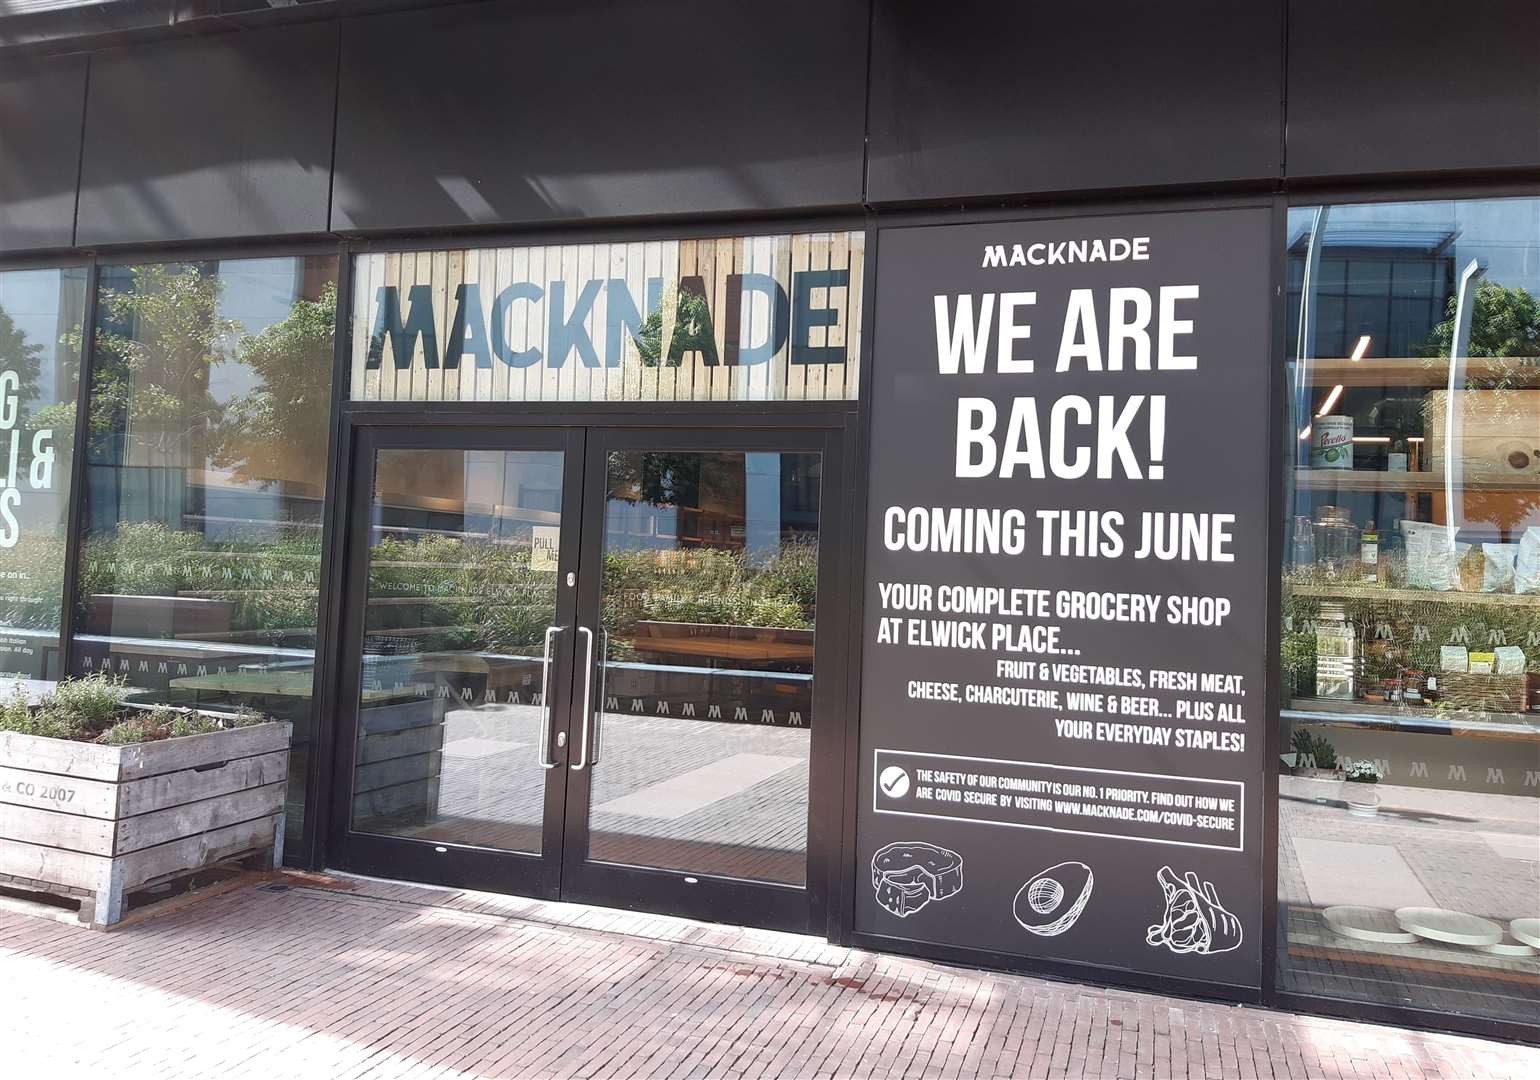 Macknade's Elwick Place branch will reopen on Wednesday